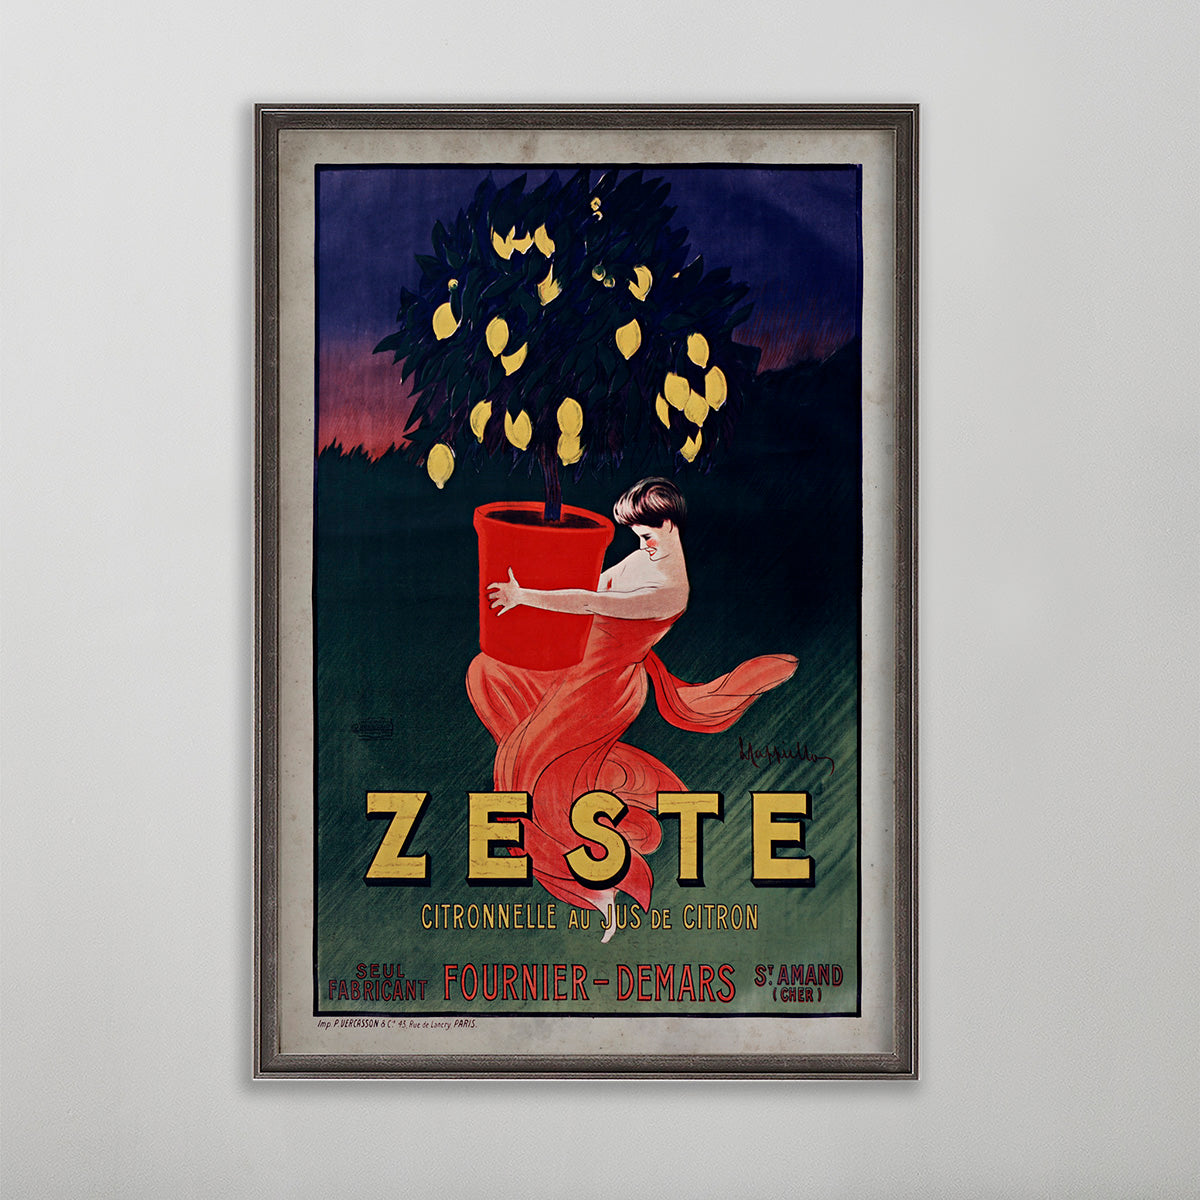 Zeste Citronelle vintage poster wall art by leonetto cappiello. Woman carrying lemon tree plant.